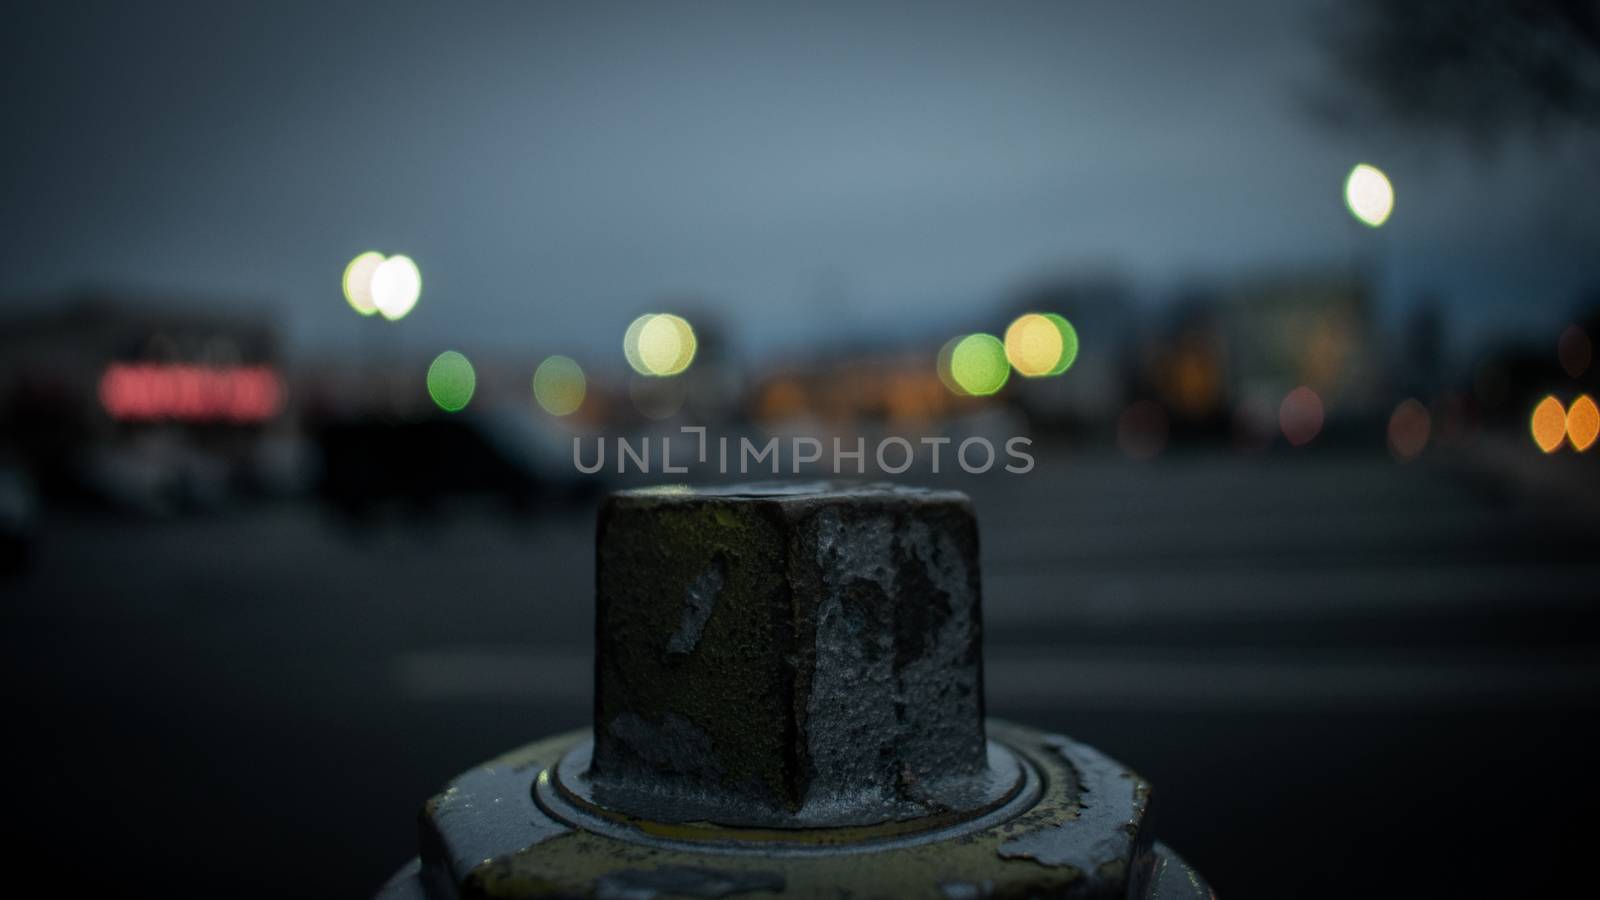 The Top of a Fire Hydrant With a Blurred Shopping Center Behind  by bju12290